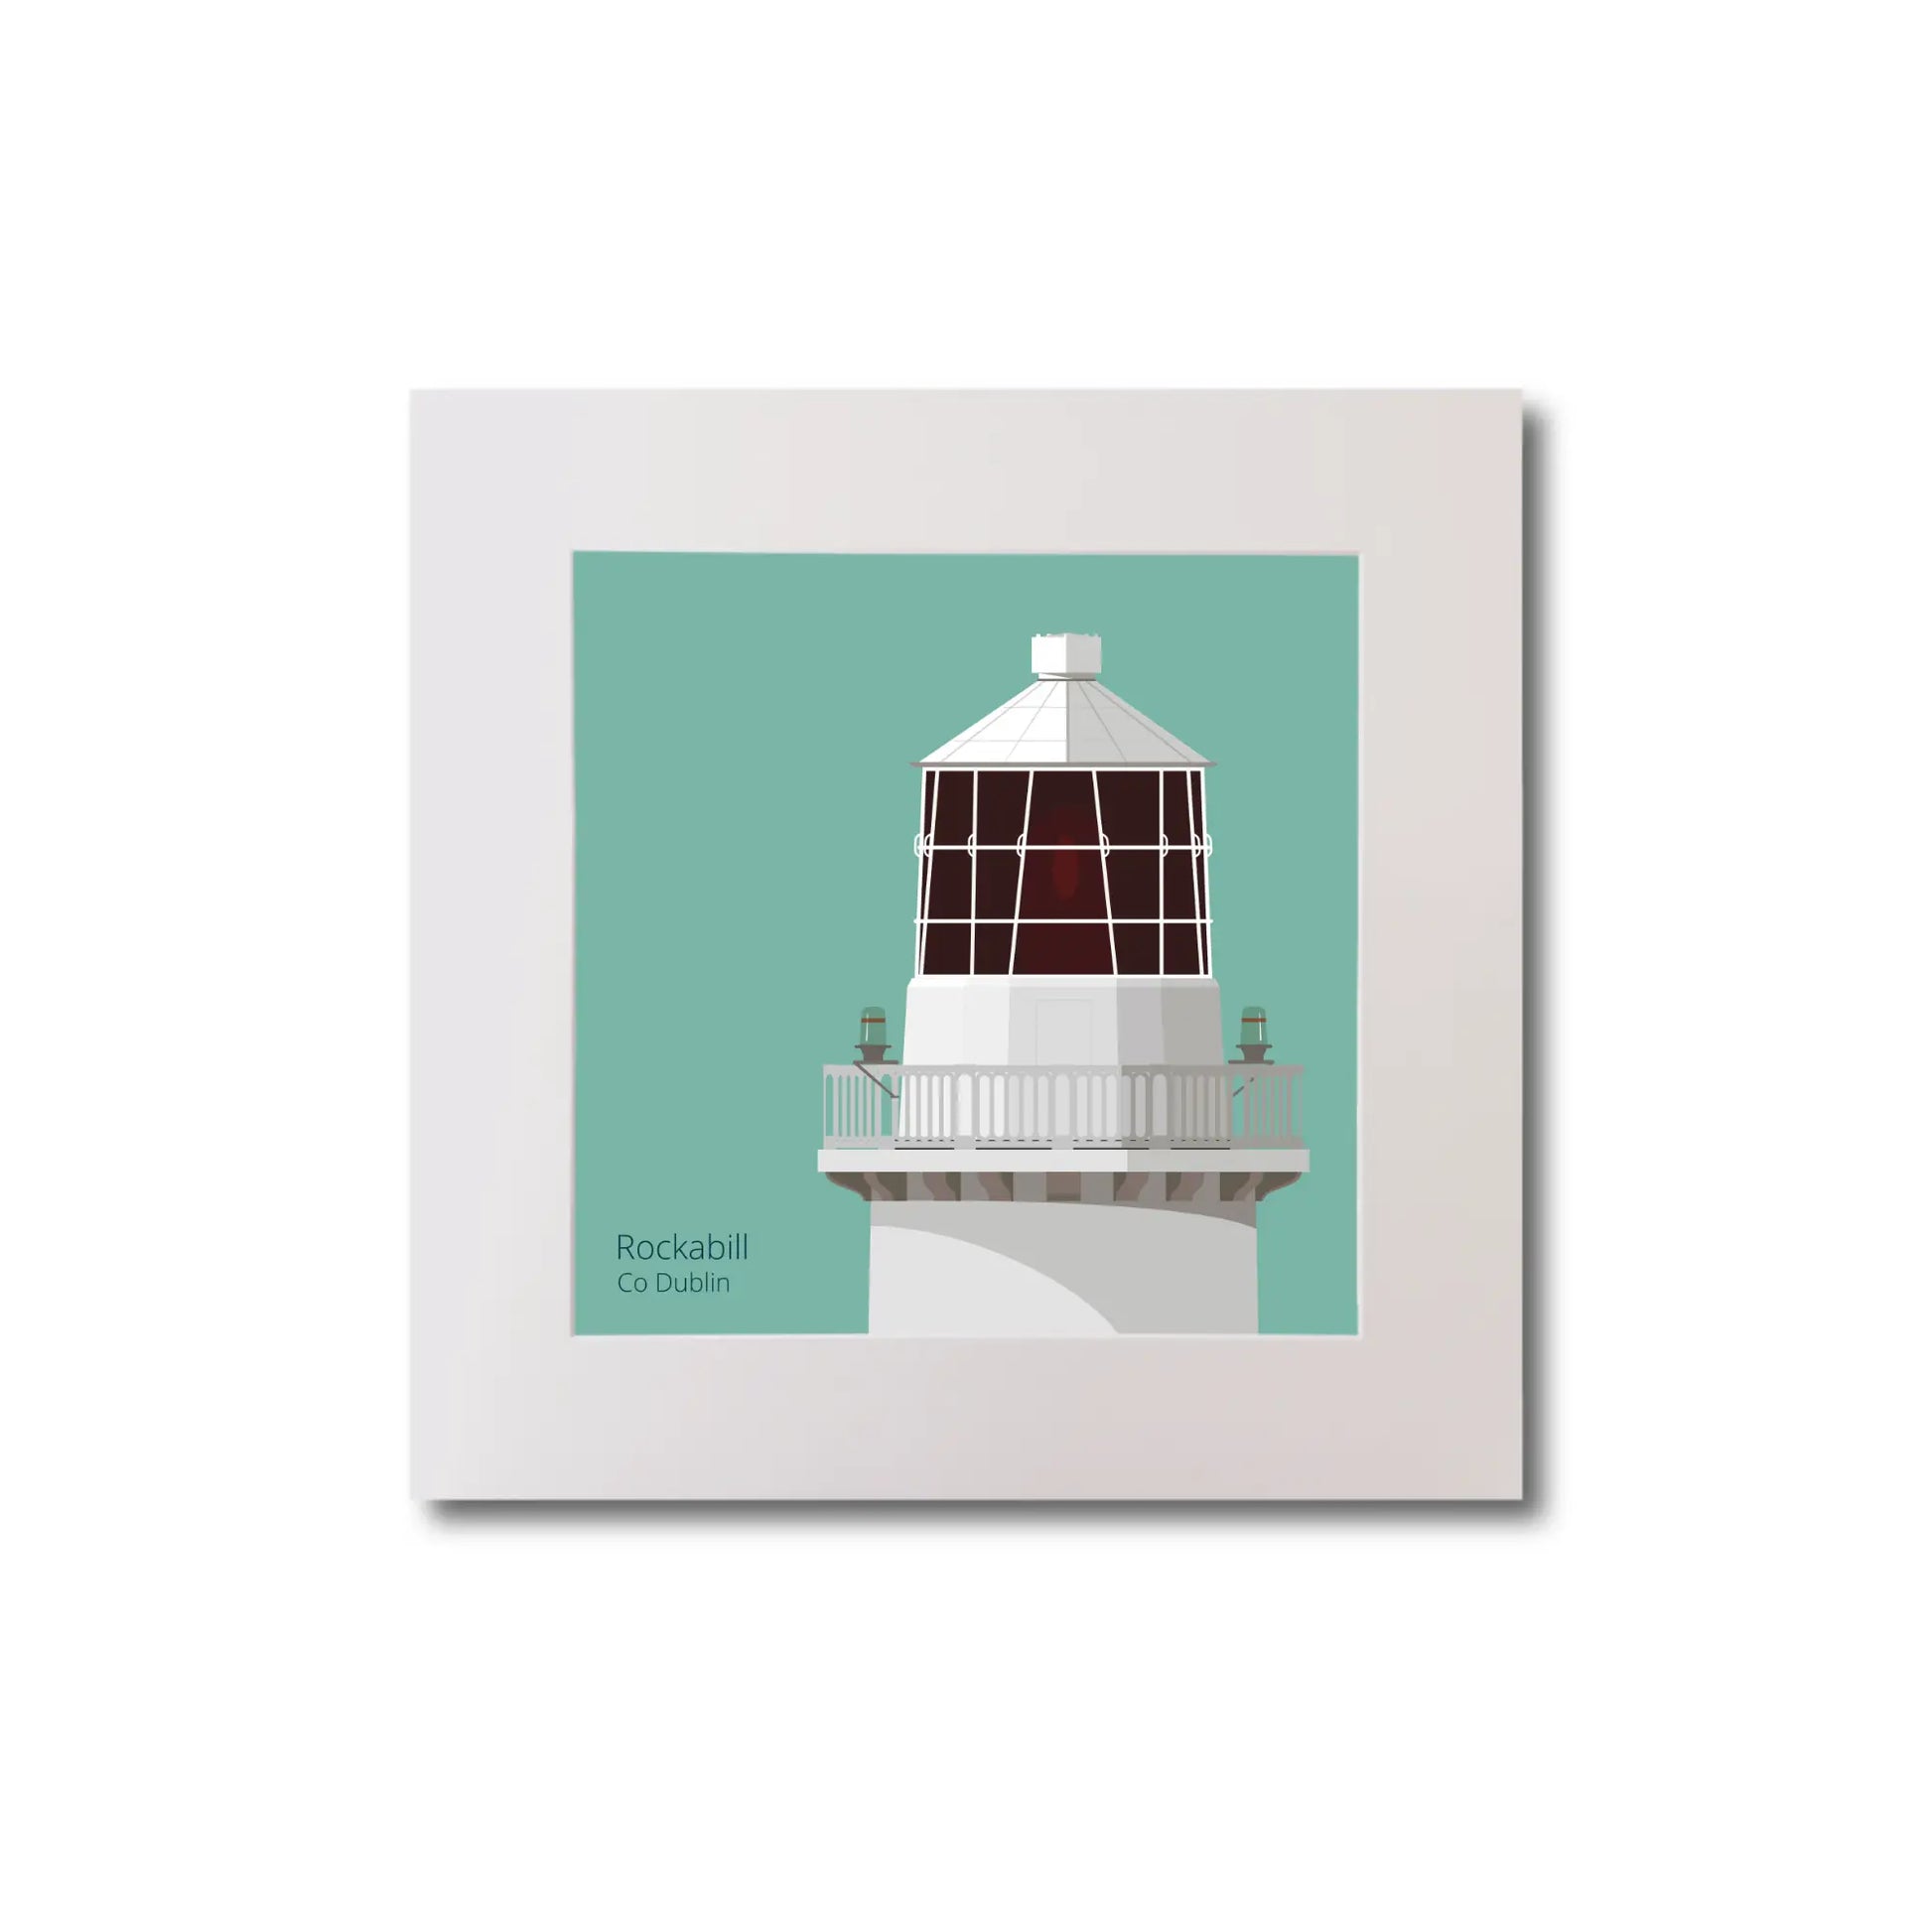 Illustration of Rockabill lighthouse on an ocean green background, mounted and measuring 20x20cm.